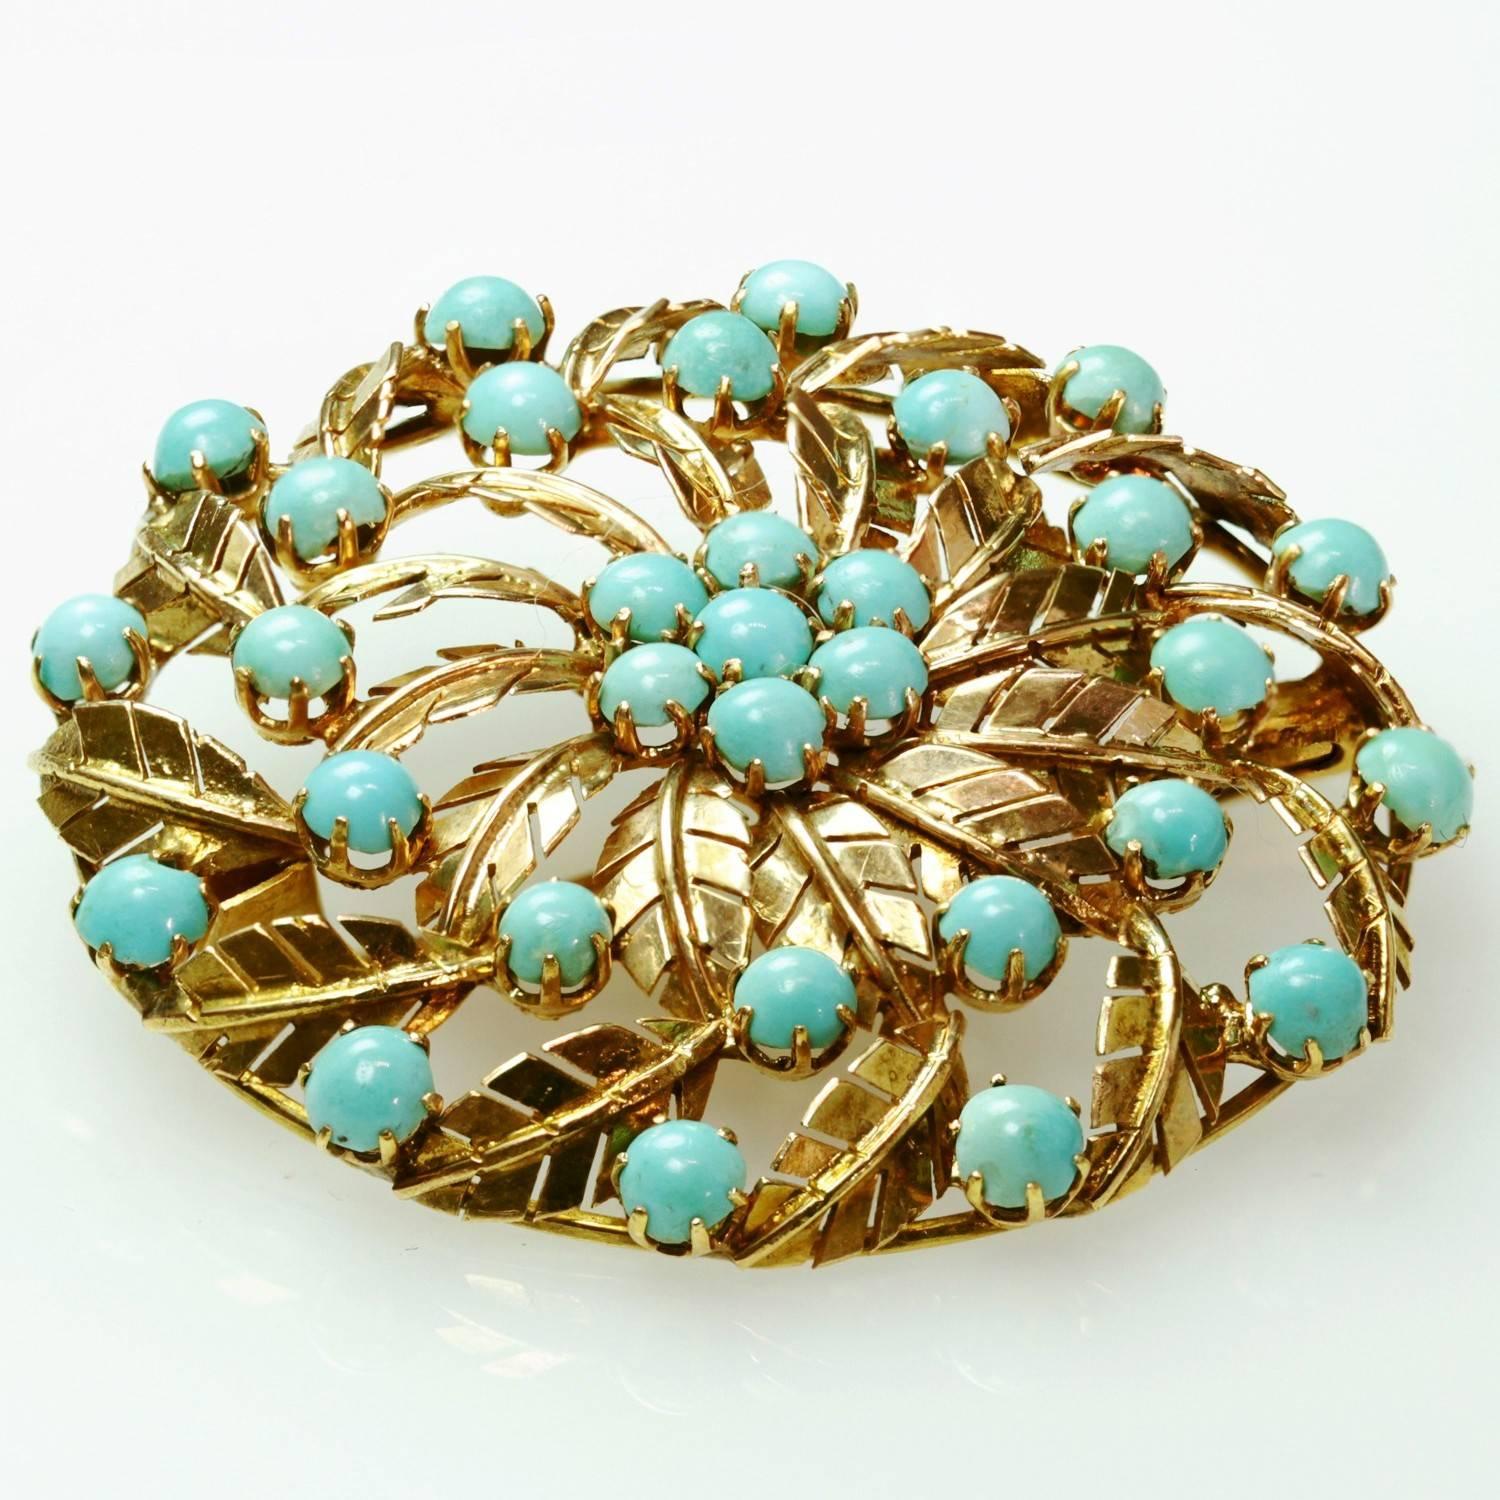 A captivating vintage brooch featuring textured leaves in 18k yellow gold set with natural round turquoise stones in even light blue tones. Circa 1940s. Measurements: 1.53